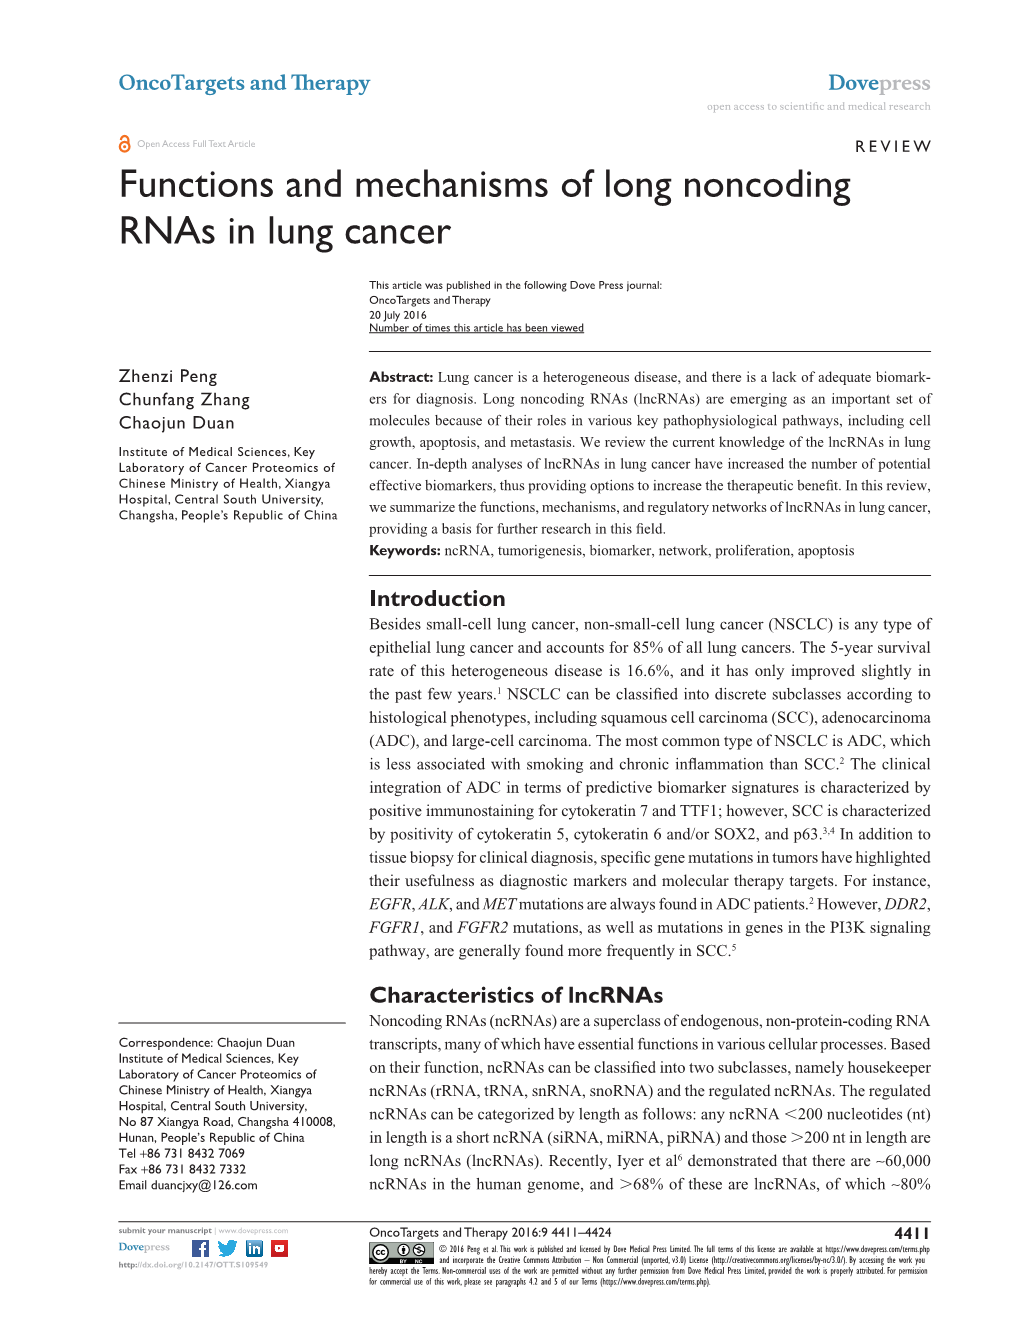 Functions and Mechanisms of Long Noncoding Rnas in Lung Cancer